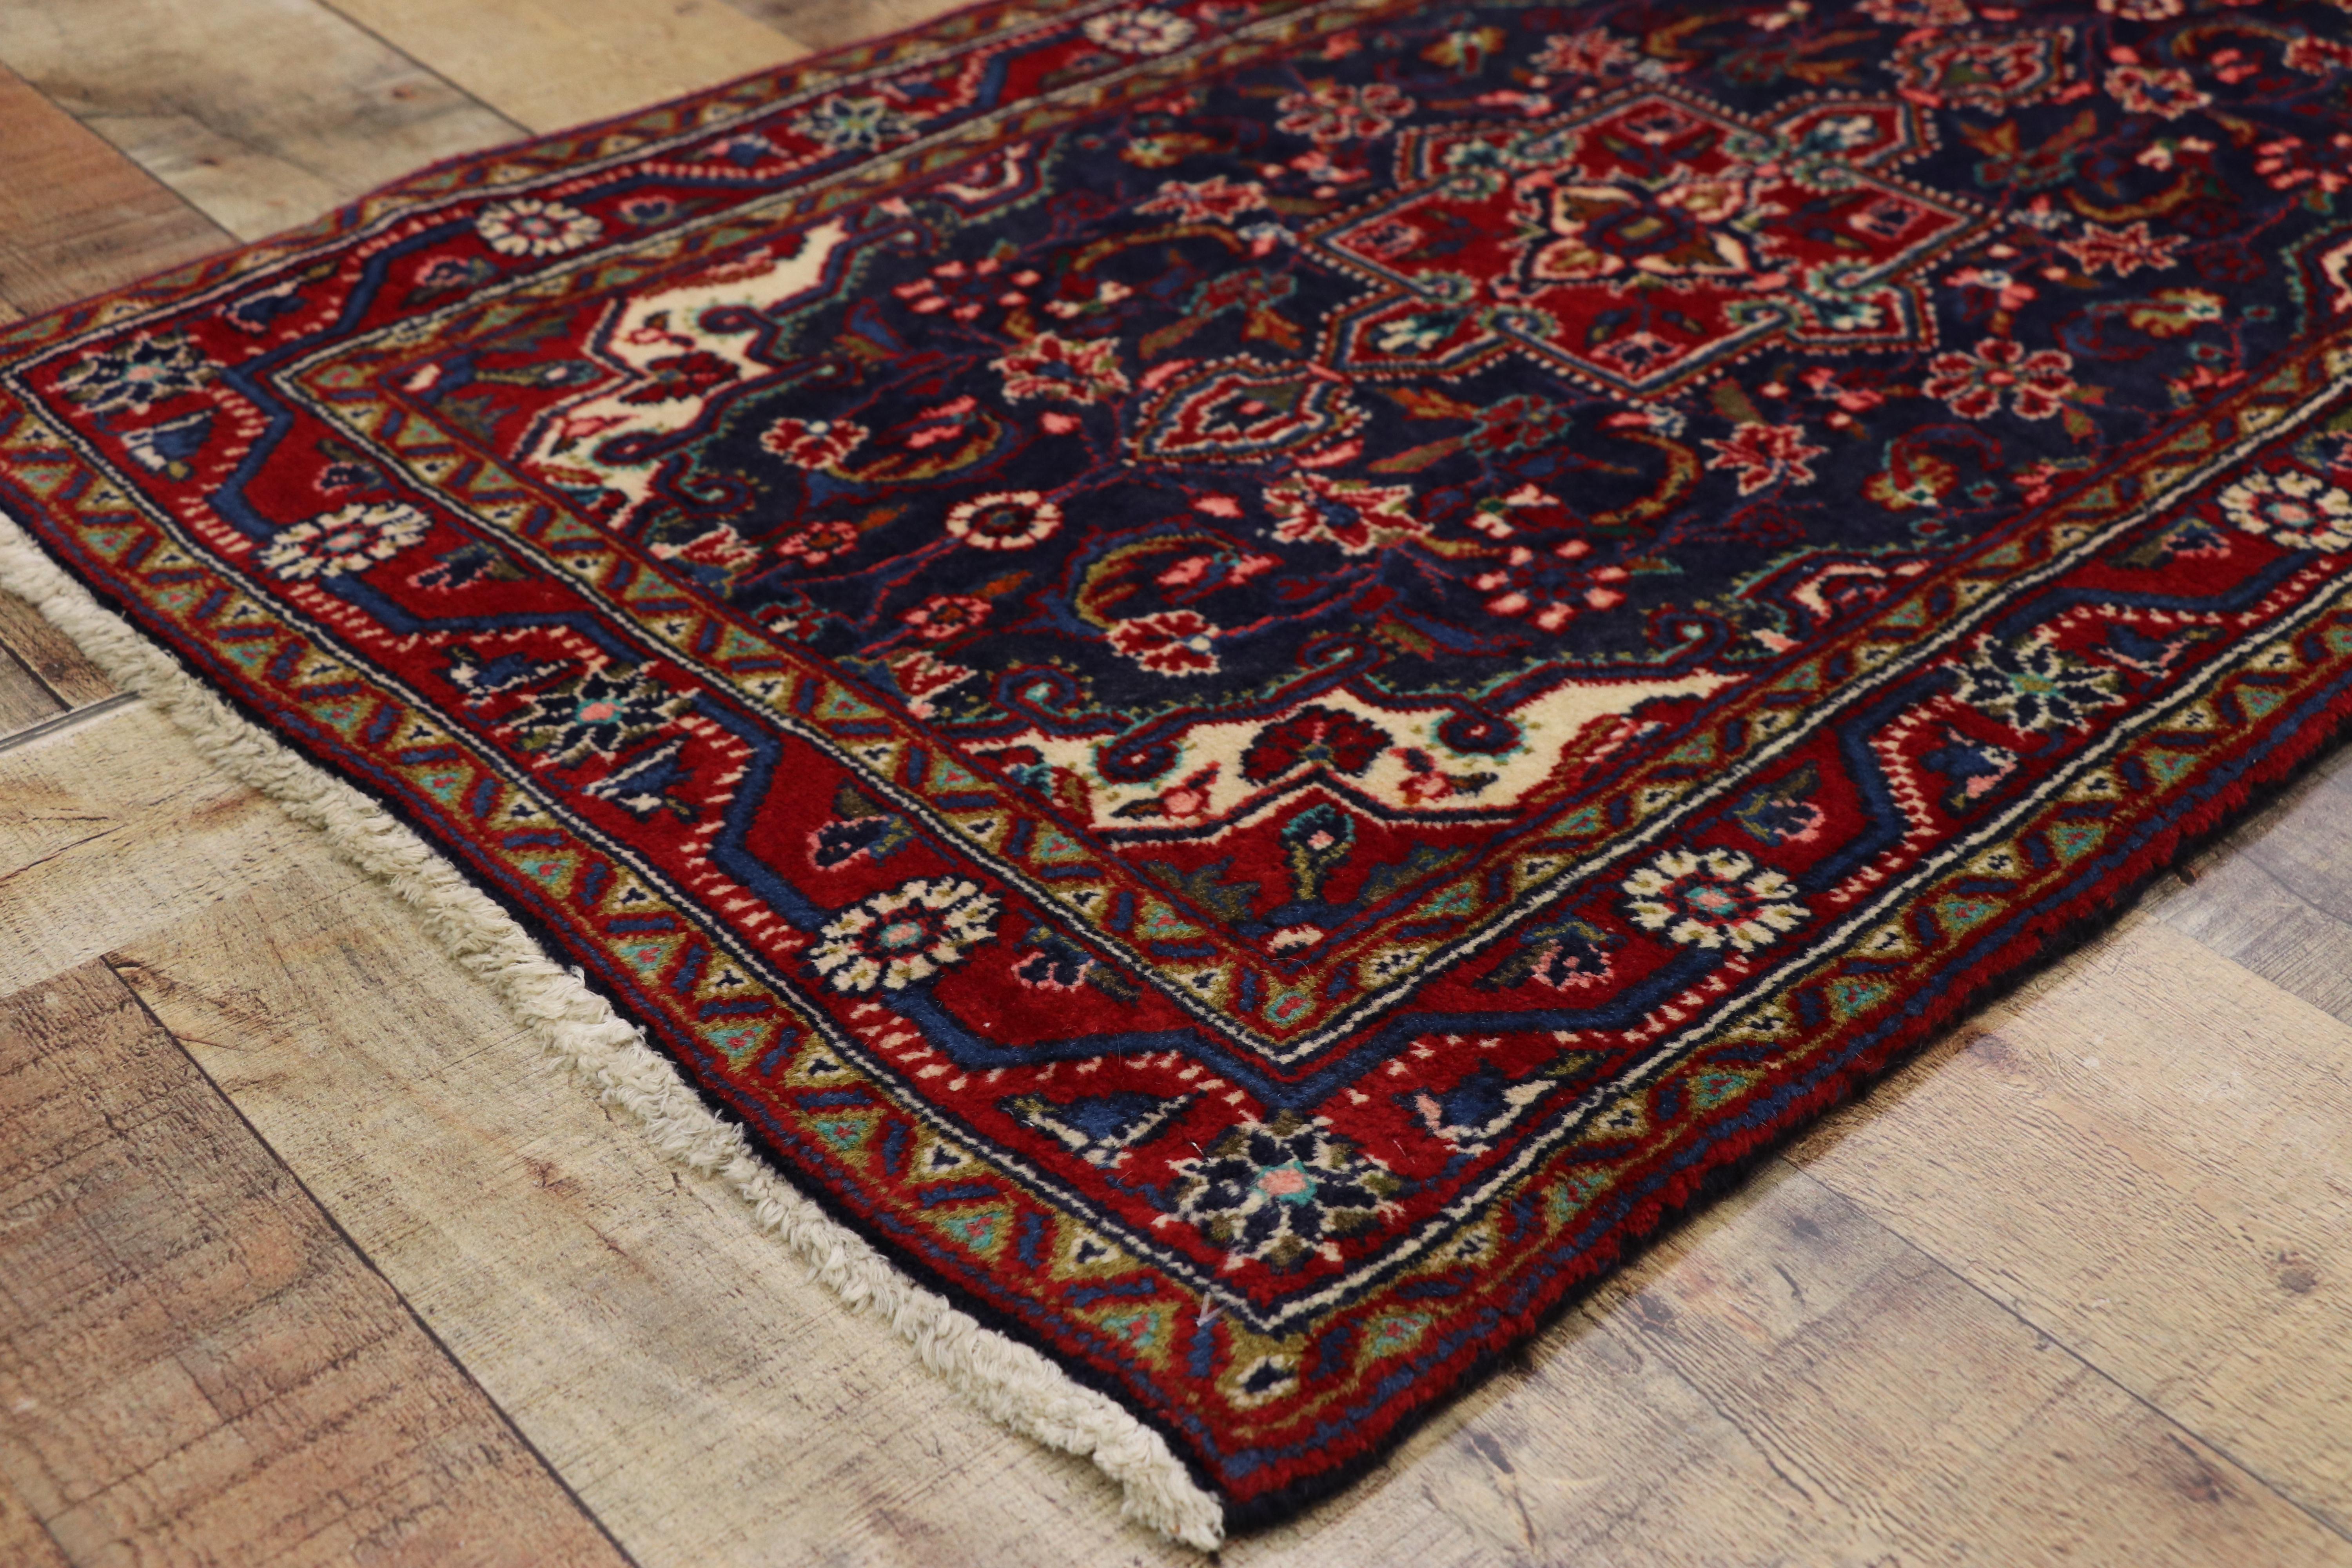 76208 Vintage Persian Hamadan Accent Rug, Small Persian Rug. This vibrant Persian Hamadan rug with traditional style features a stylized central square medallion flanked with trefoil pendants on either side surrounded by an allover floral pattern